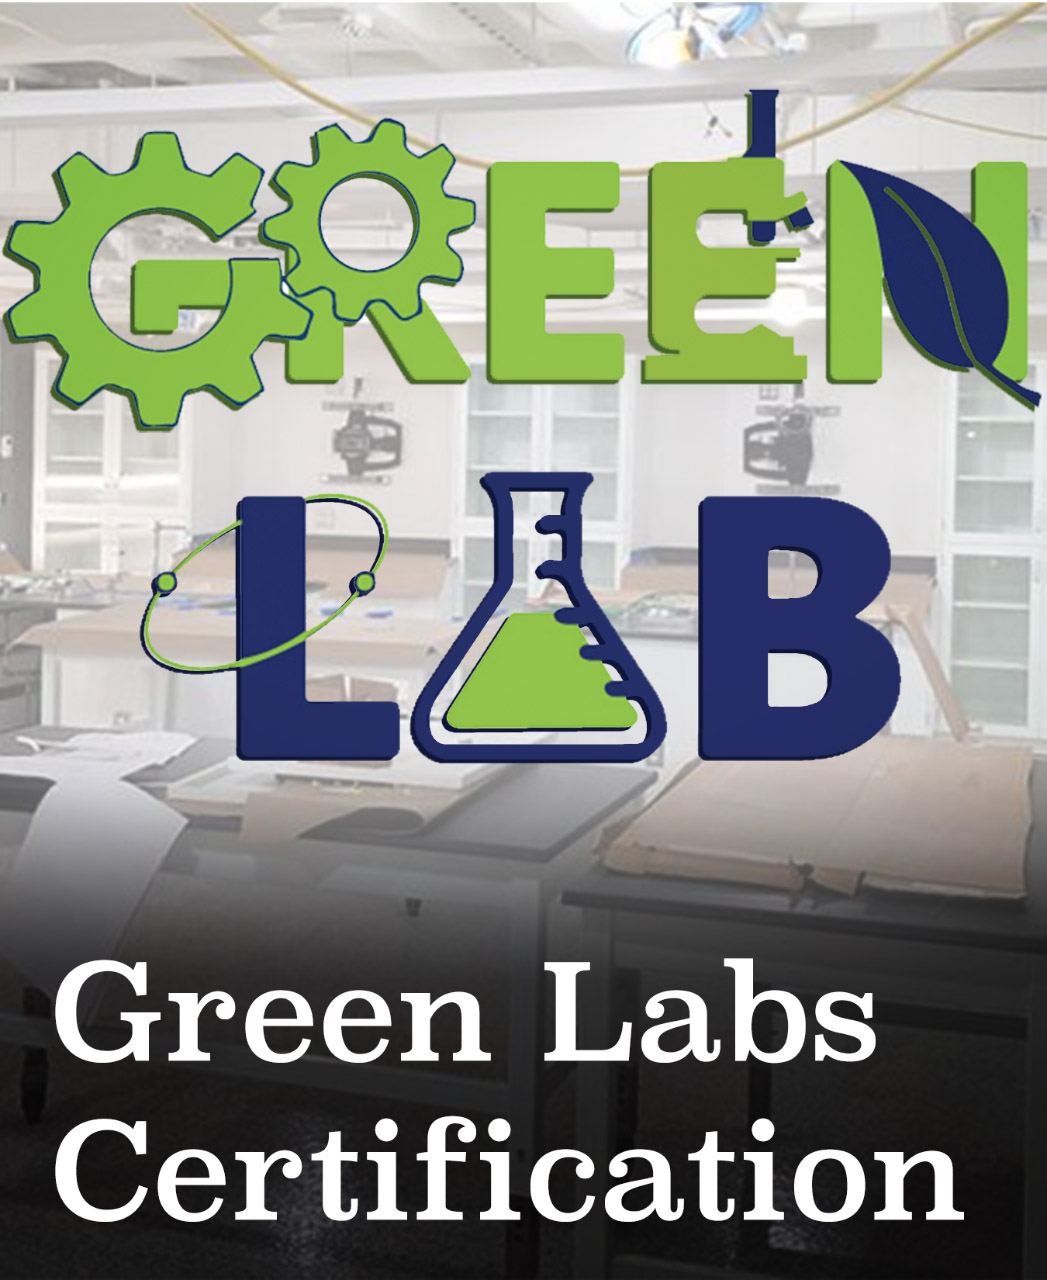 Green Labs Certification Graphic